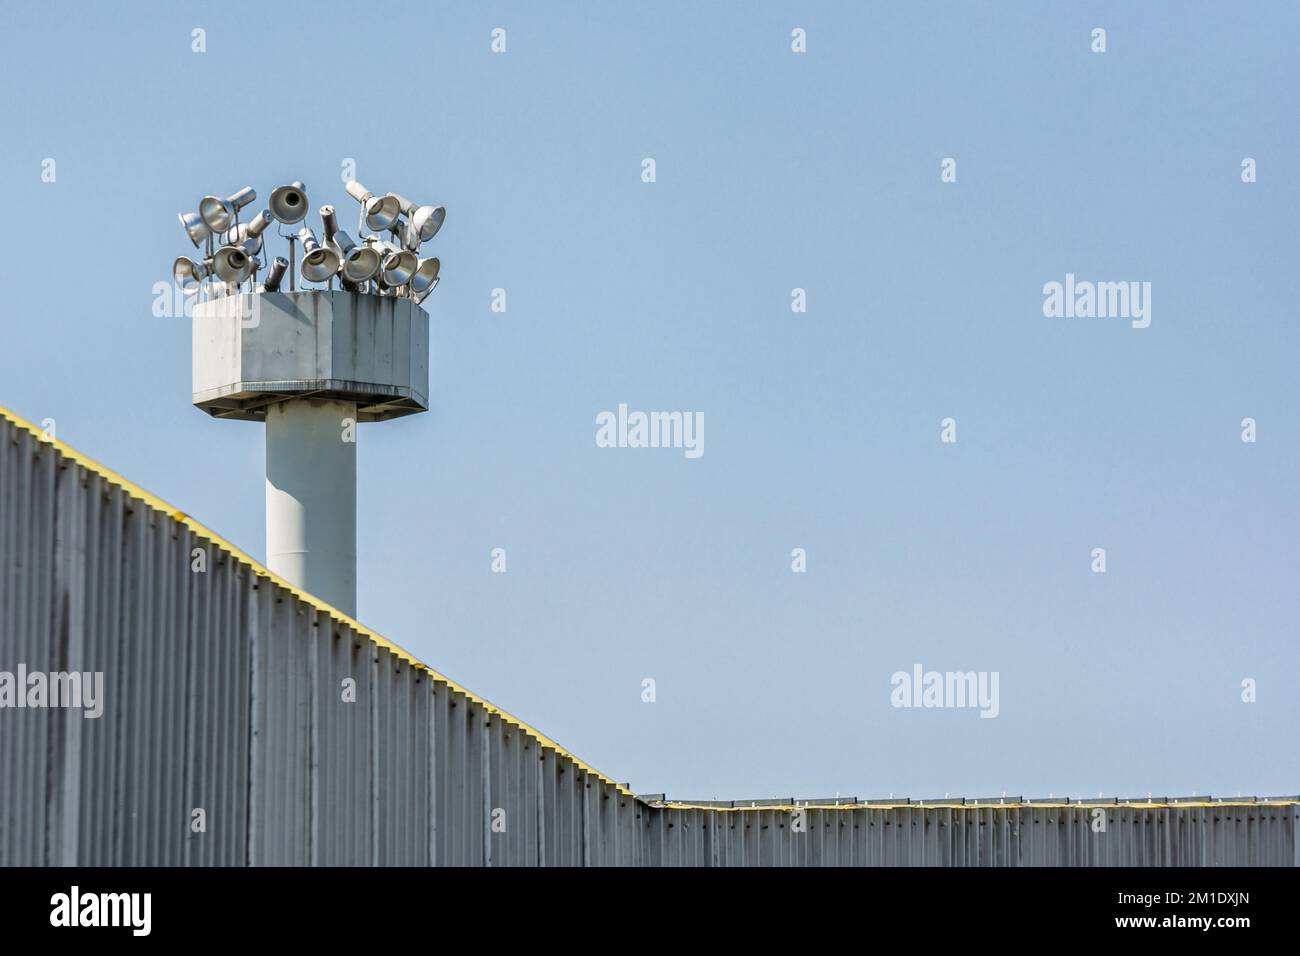 High walls with searchlights as a symbol of borders and prisons Stock Photo